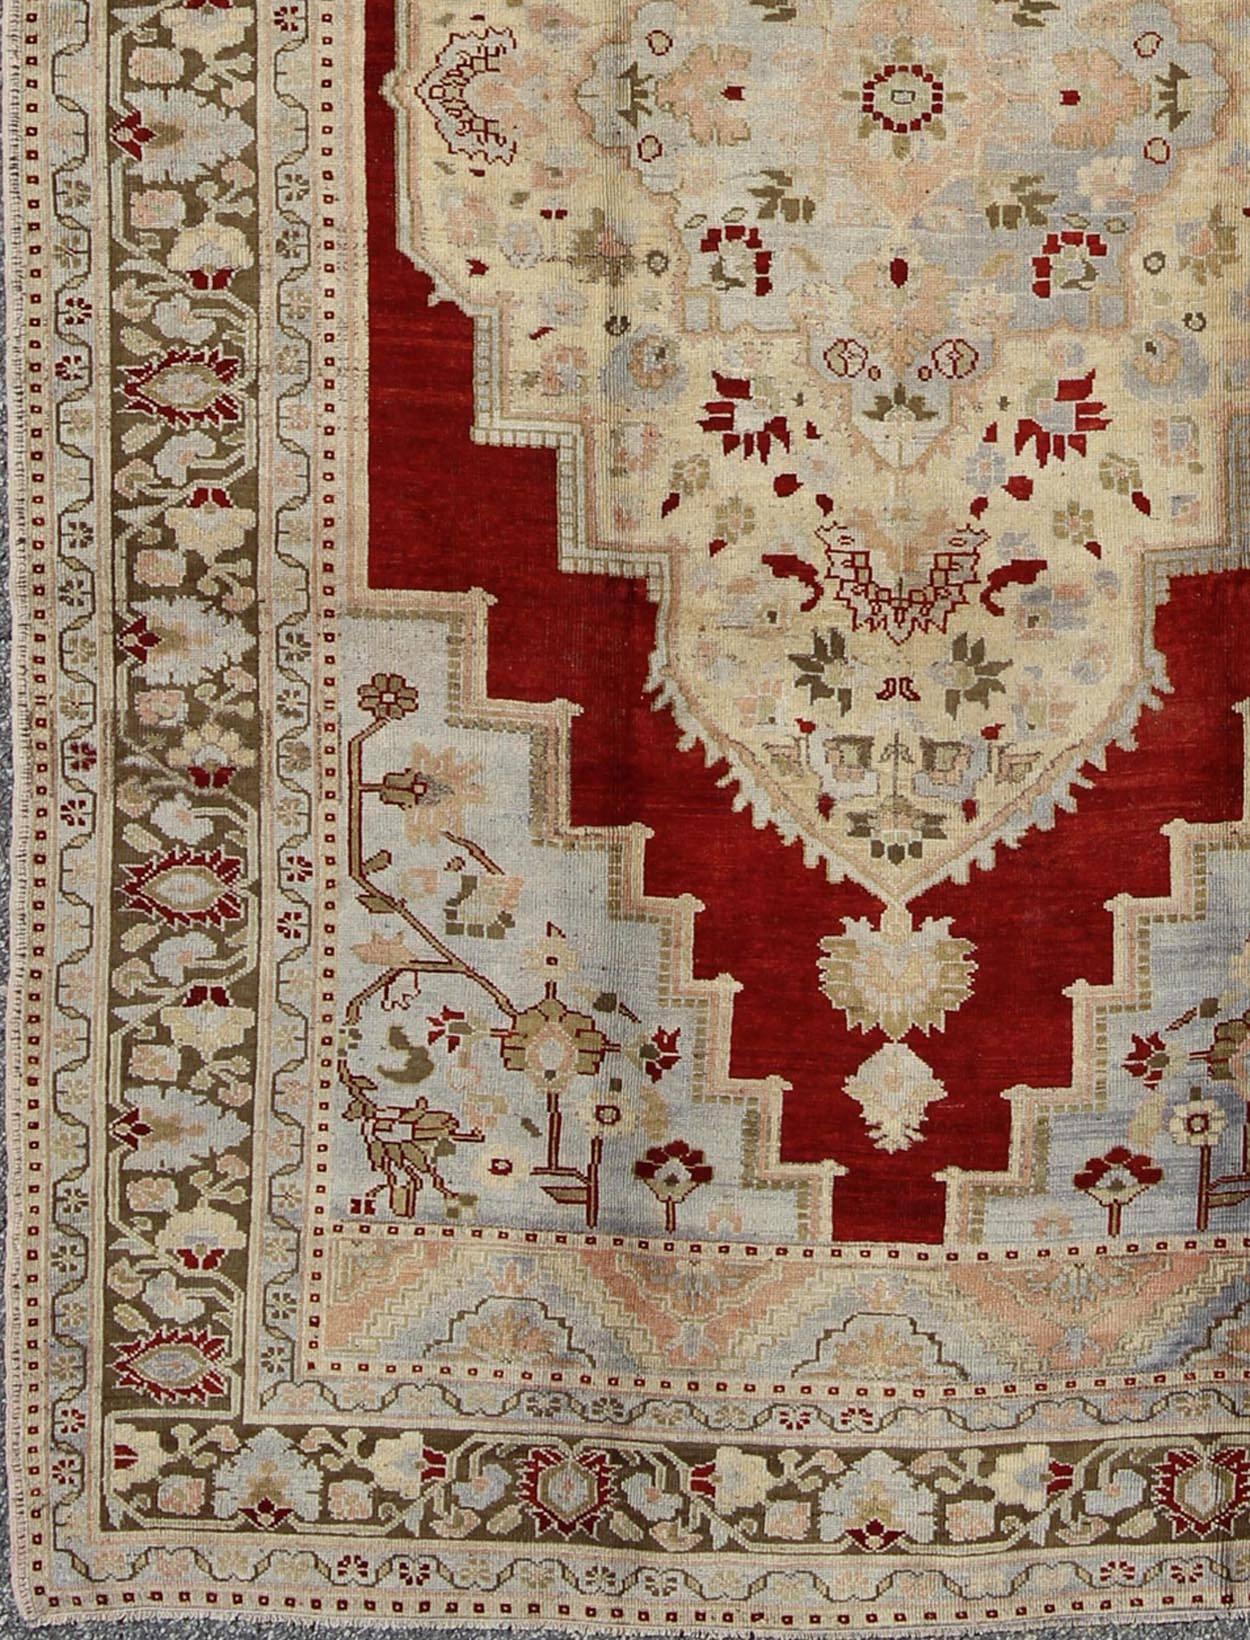 Keivan Woven Arts-Atlanta  A beautiful Red background Turkish Vintage Oushak rug with Intricate Floral Medallion, rug dur-447, country of origin / type: Turkey / Oushak, circa mid-20th century

This vintage Turkish Oushak carpet (circa mid-20th